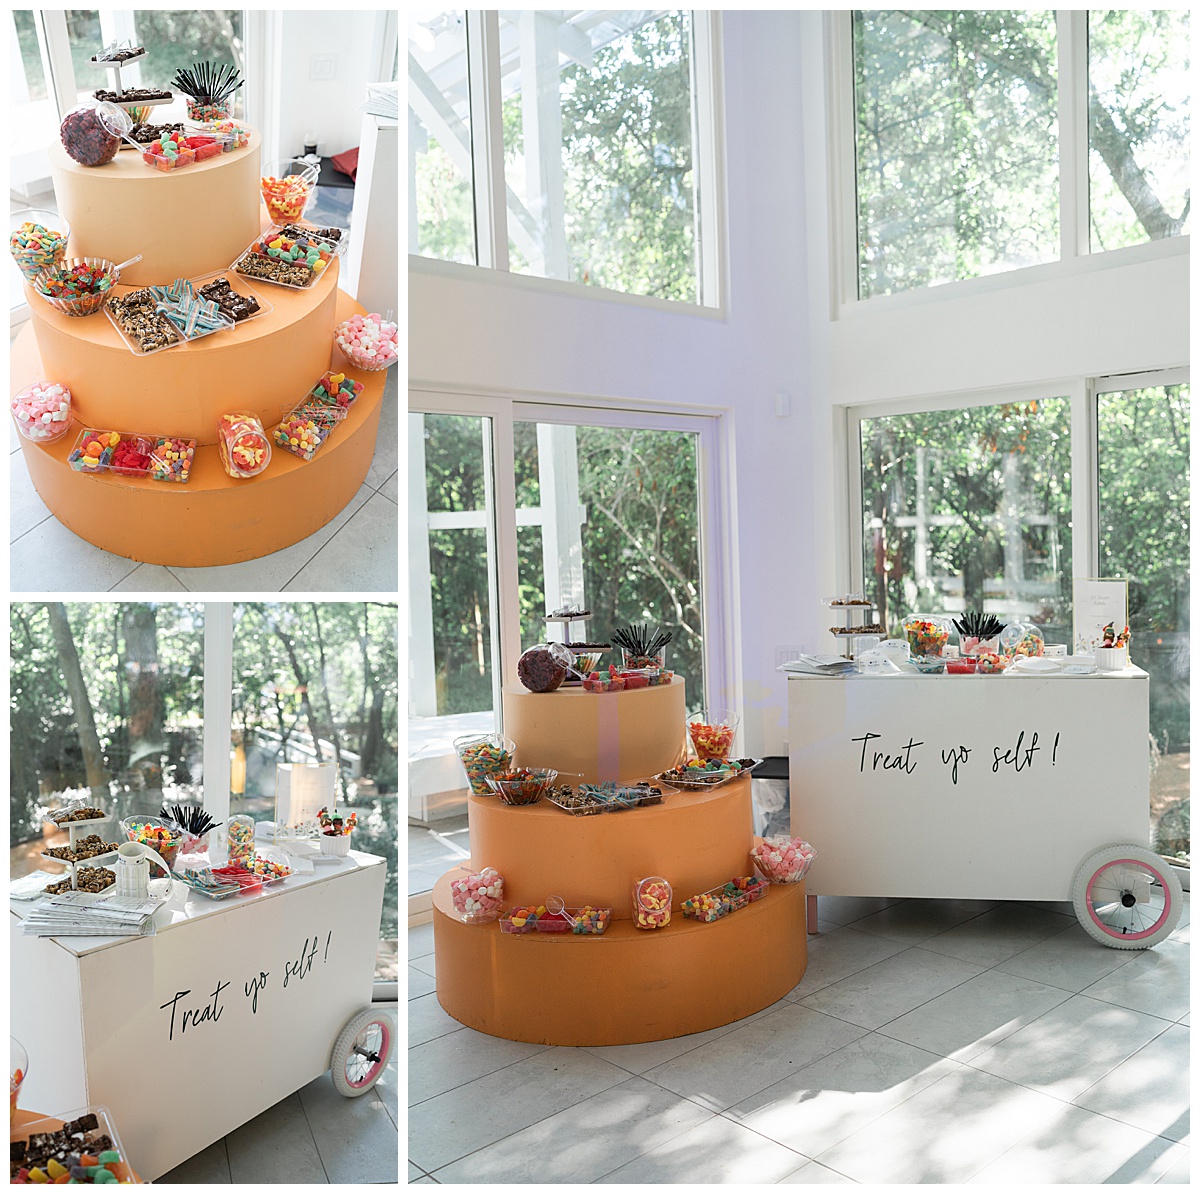 Dessert display and cart for the Open House at The Juliana